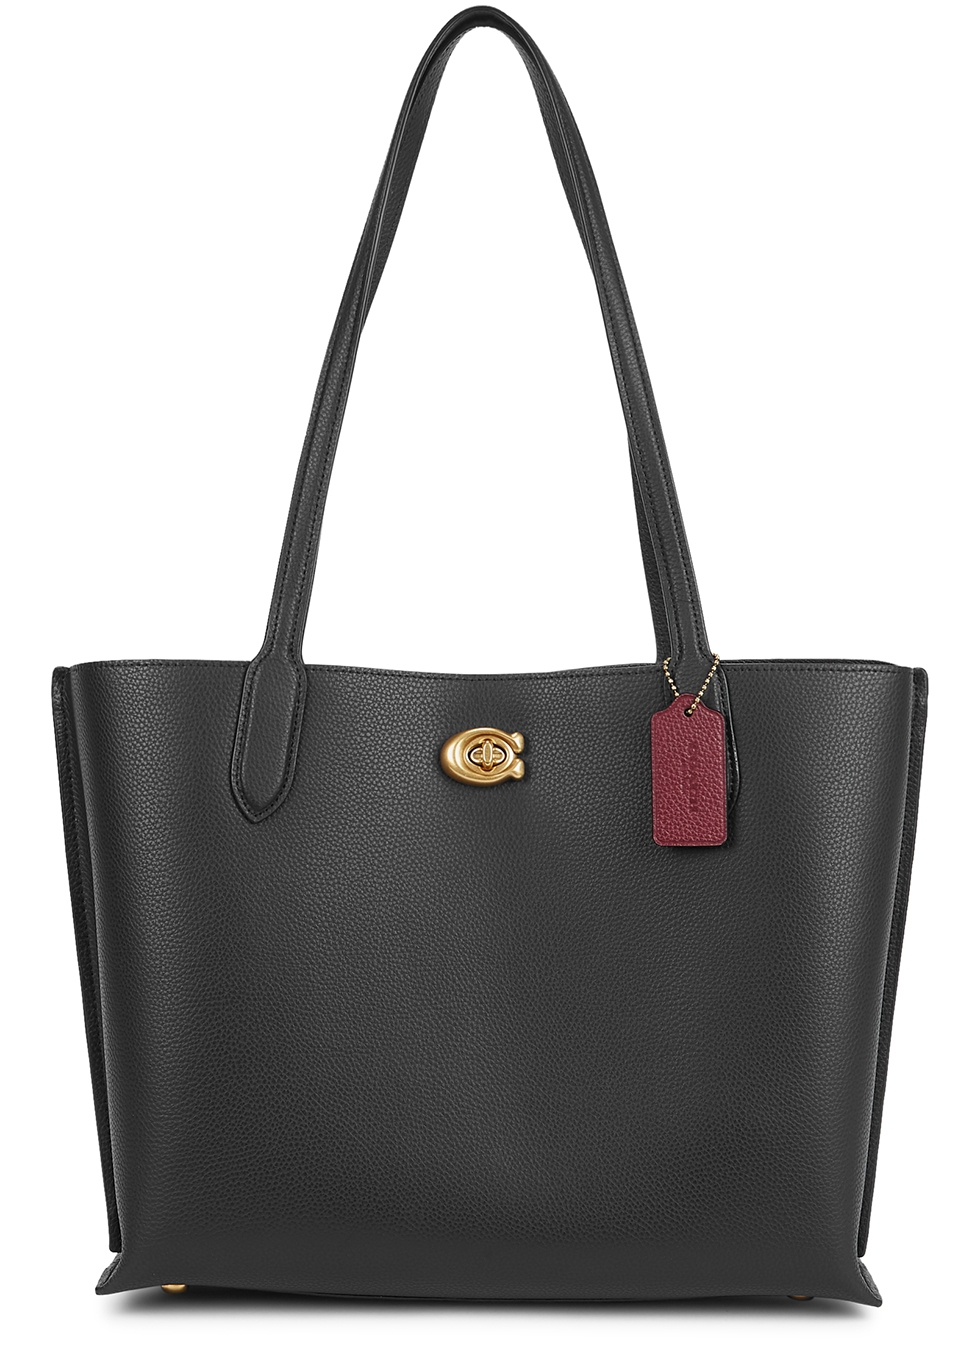 Coach Willow black leather tote - Harvey Nichols